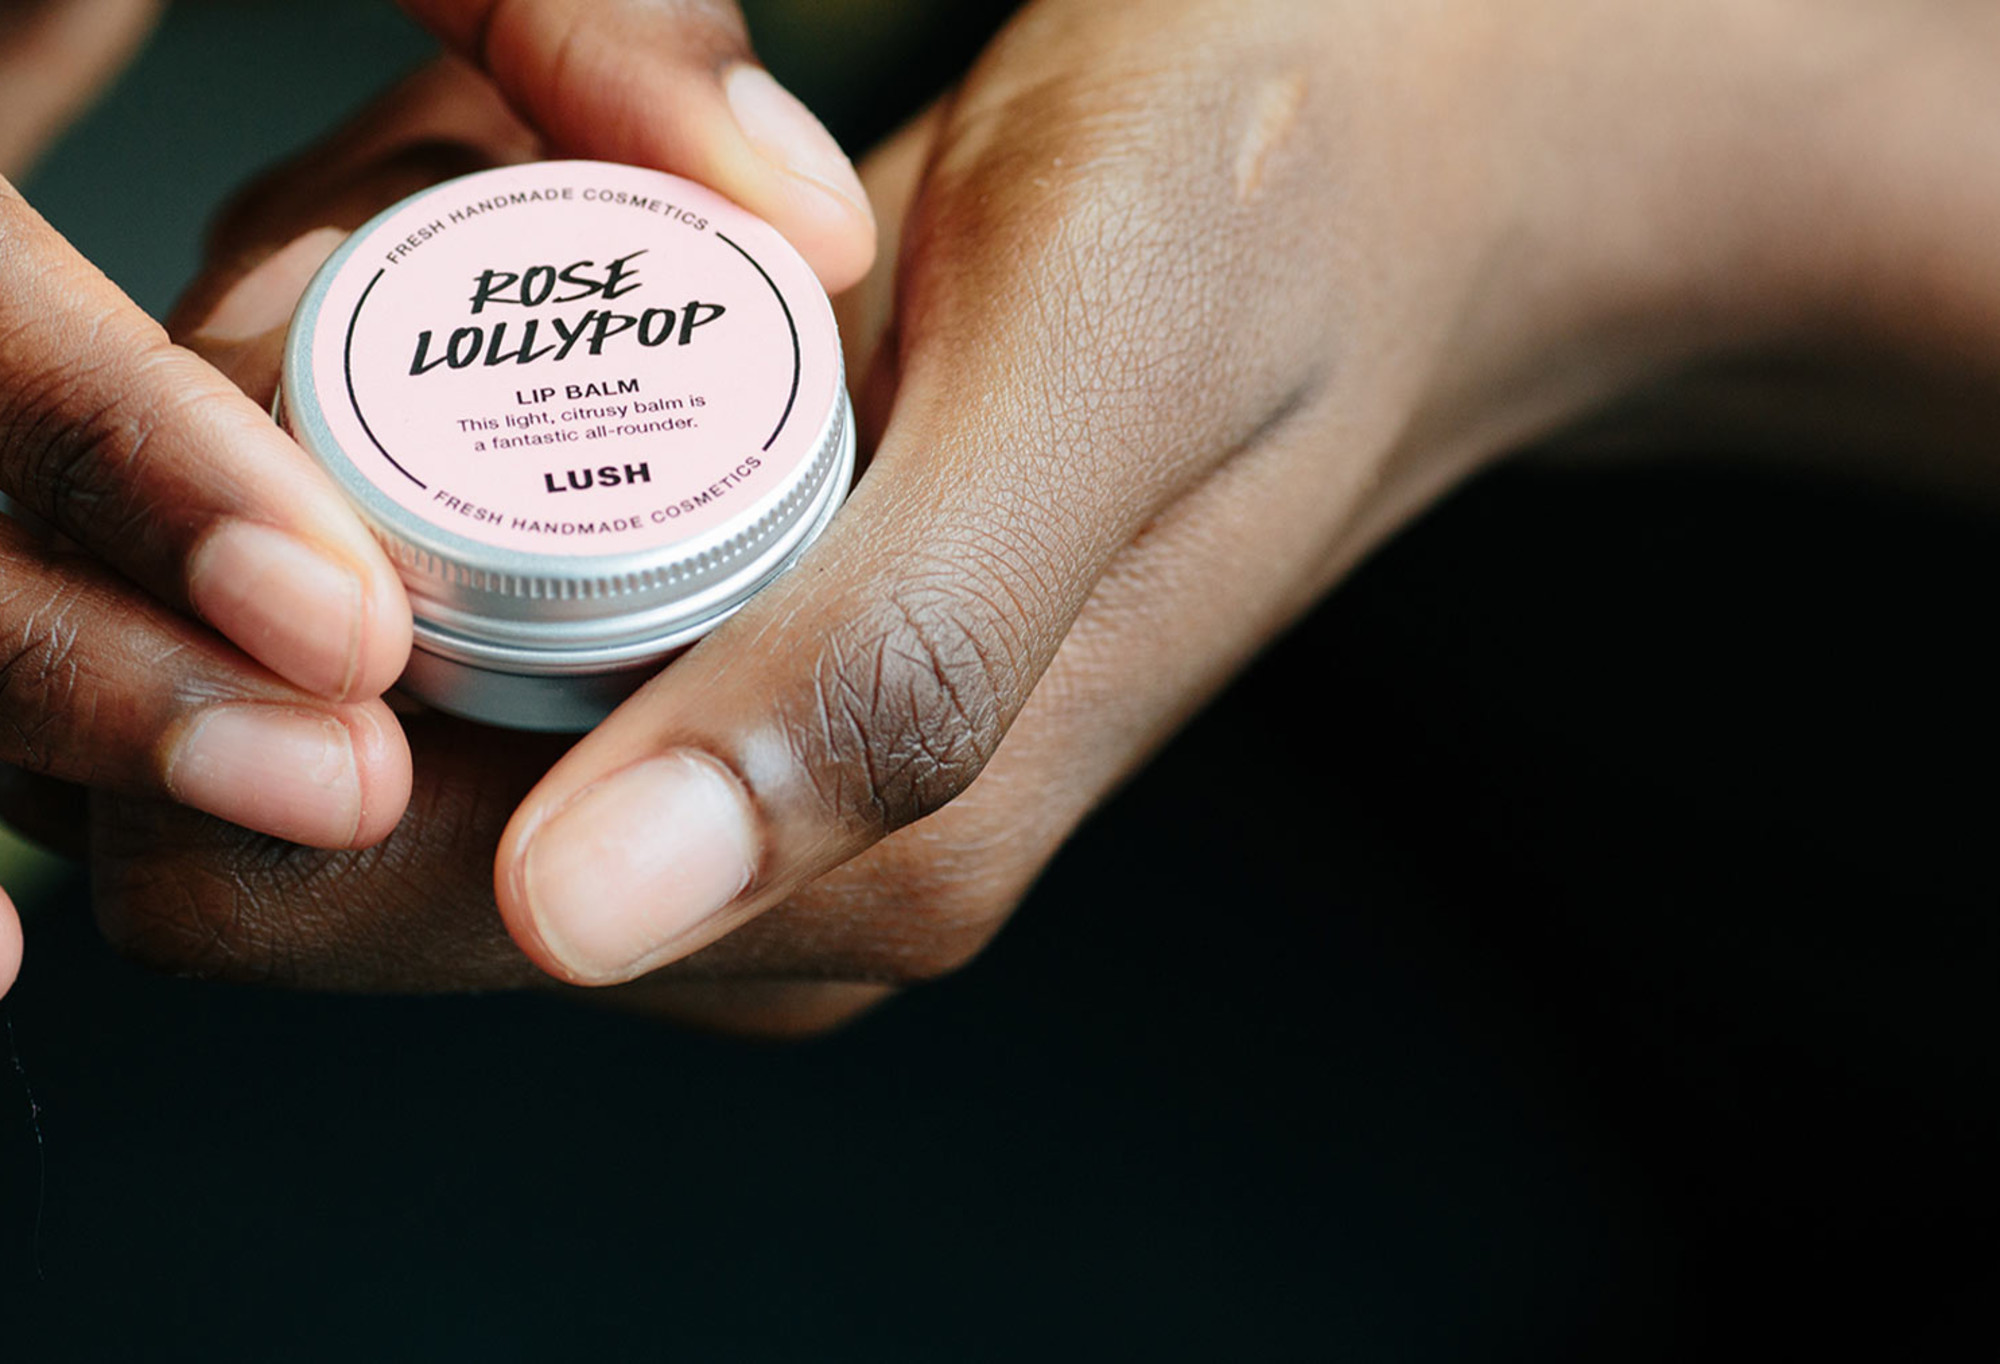 A small, metal tin, with a rosy pink label stating Rose Lollipop lip balm is held, as if about to be opened.